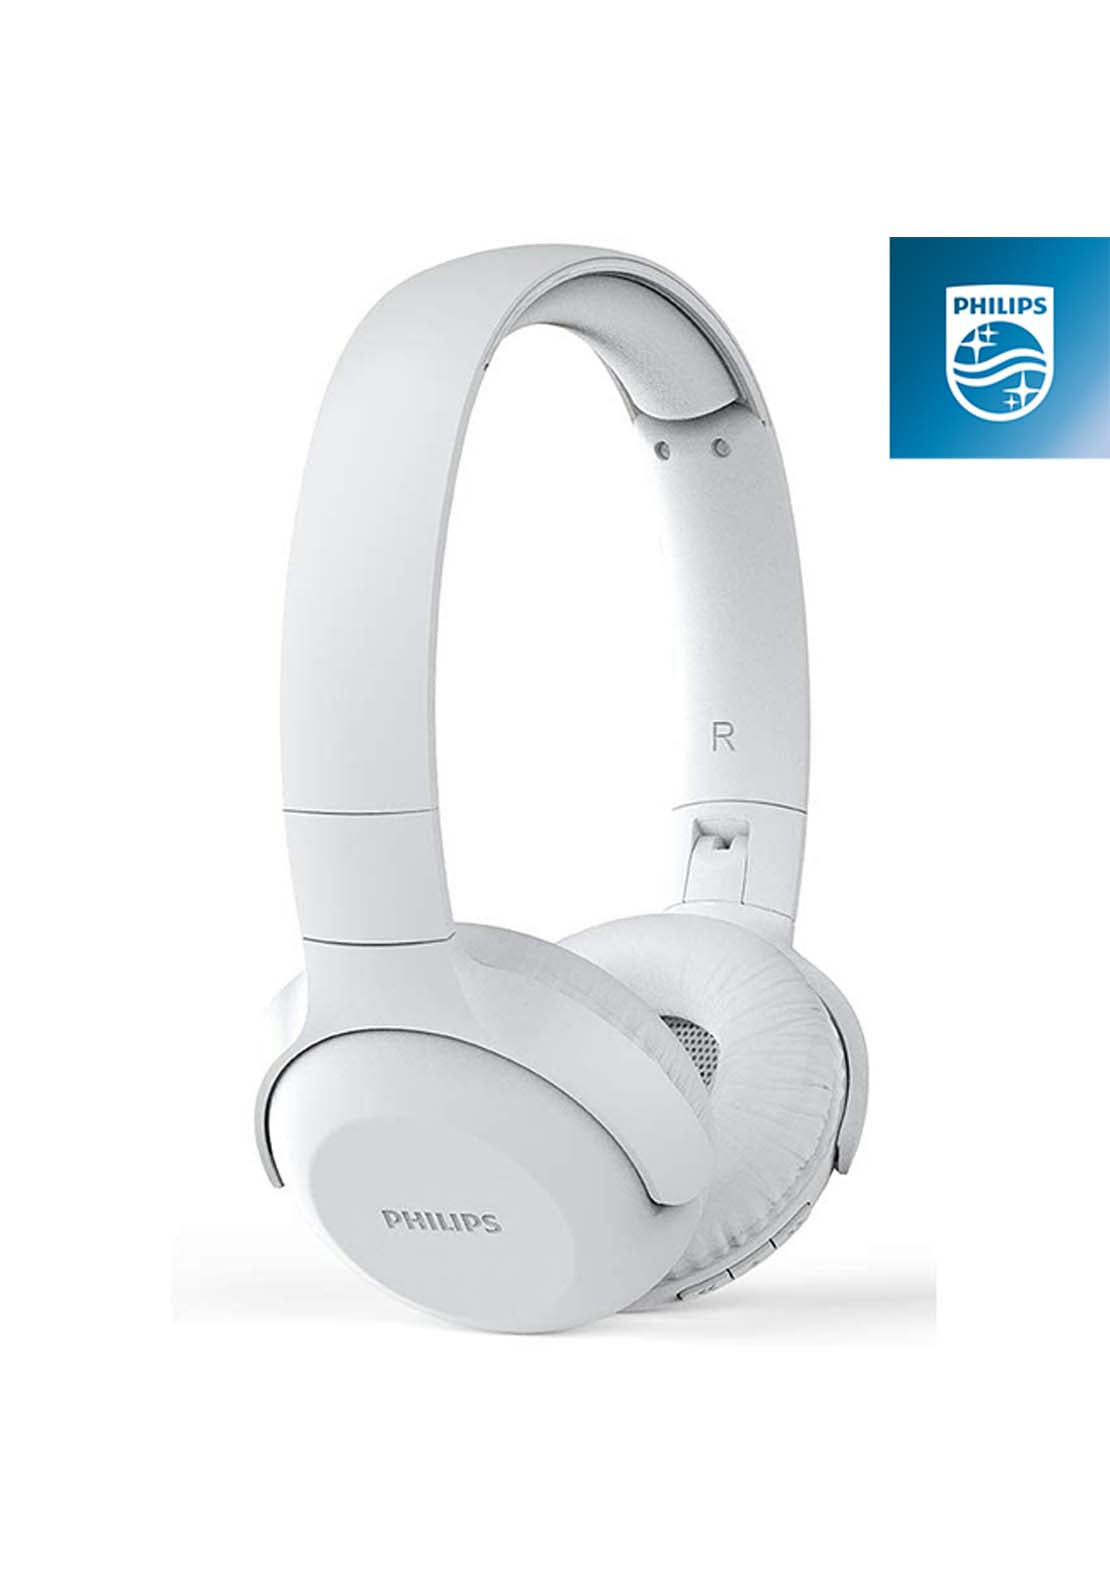 Philips On-Ear Bluetooth Headphones | Tauh202Wt00 4 Shaws Department Stores